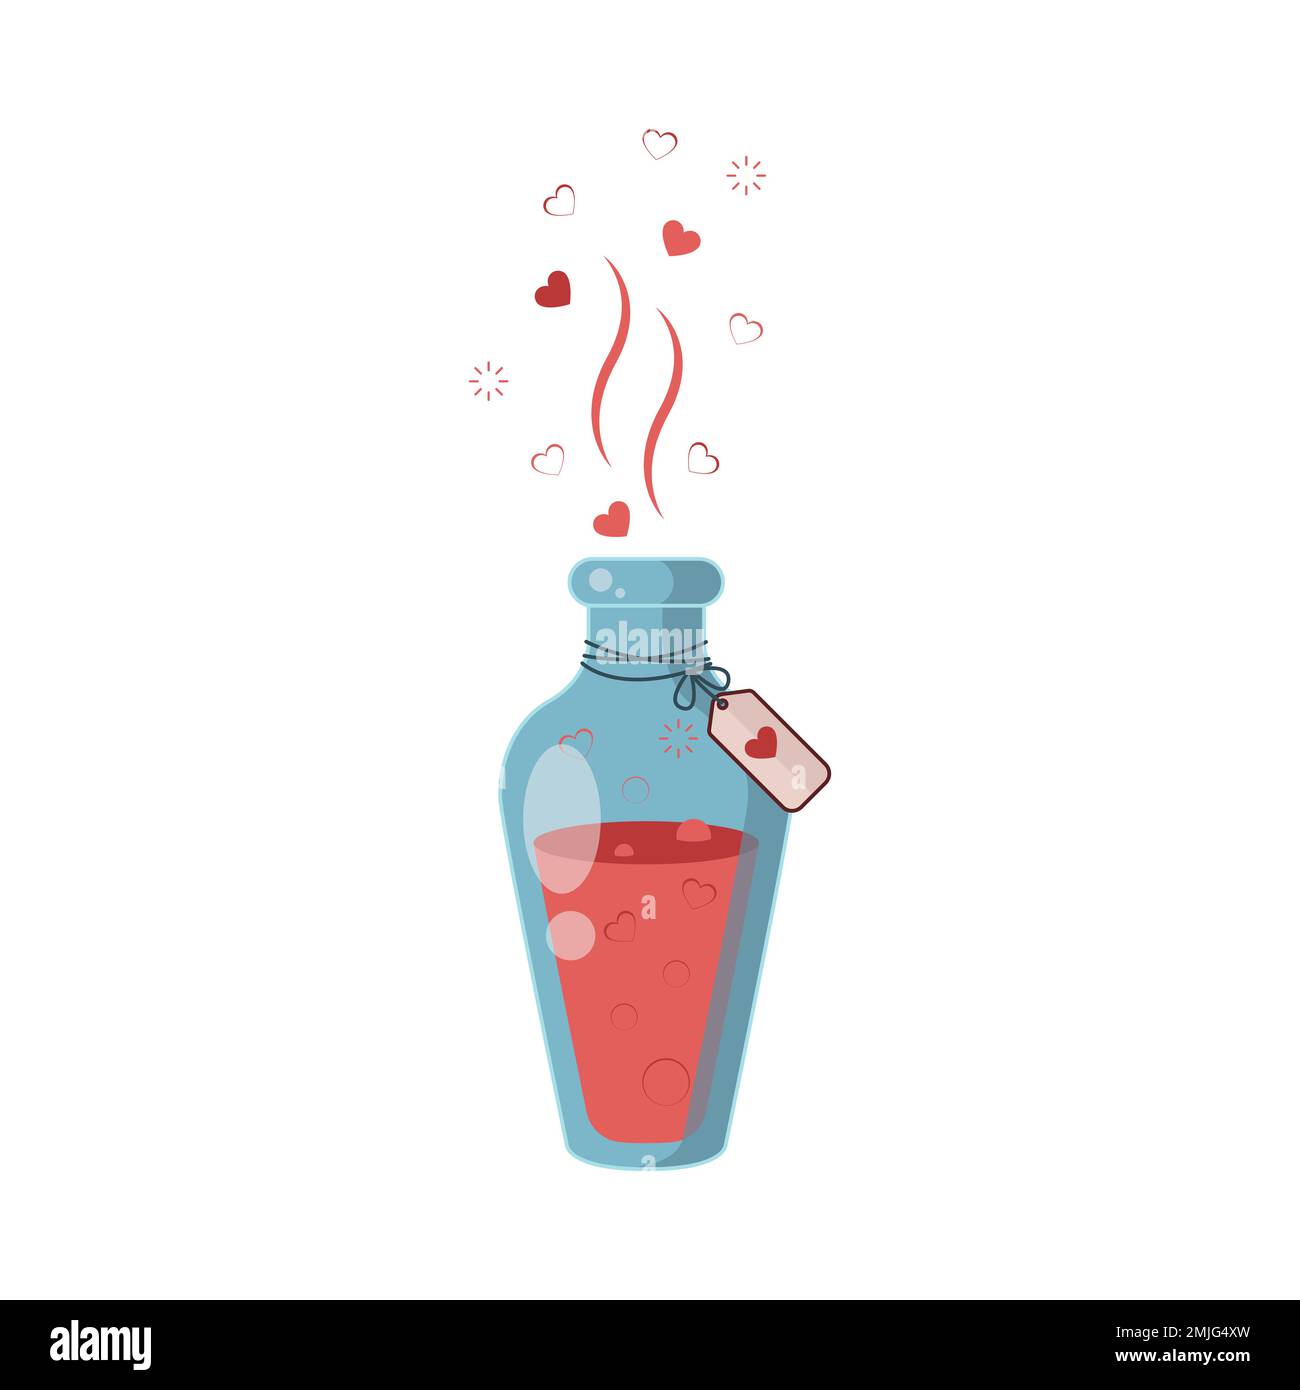 Love potion. The drink that makes you fall in love with yourself. Bottles of Magic elixir. Red Liquid in glass jar in flat style. Vector illustration. Stock Vector